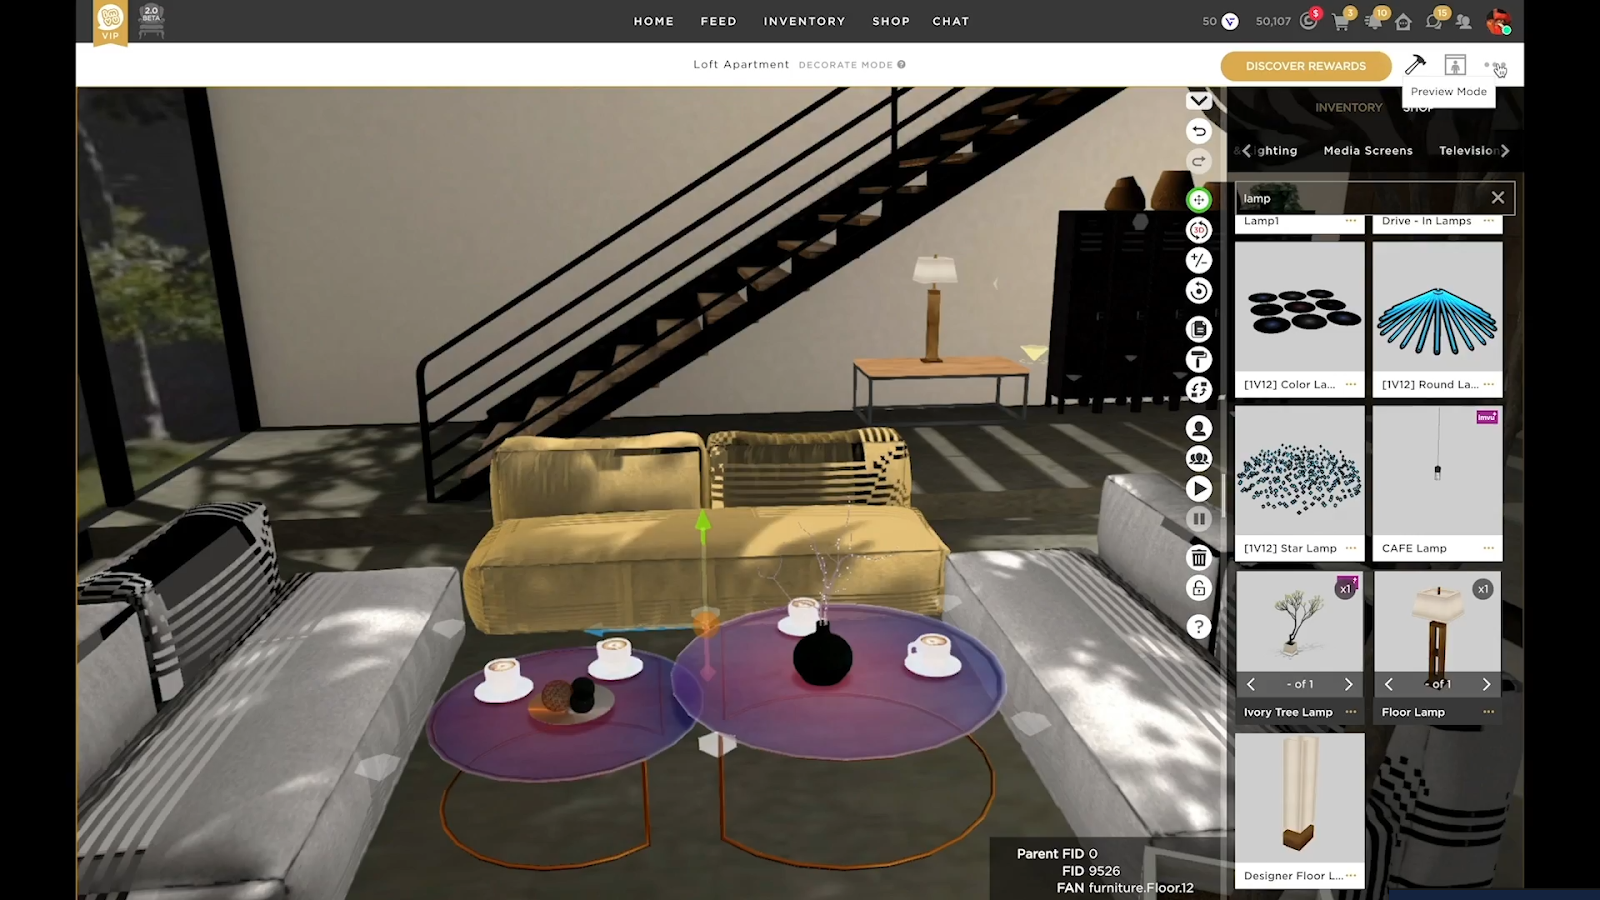 How to Decorate Your Room on IMVU Next and IMVU Desktop